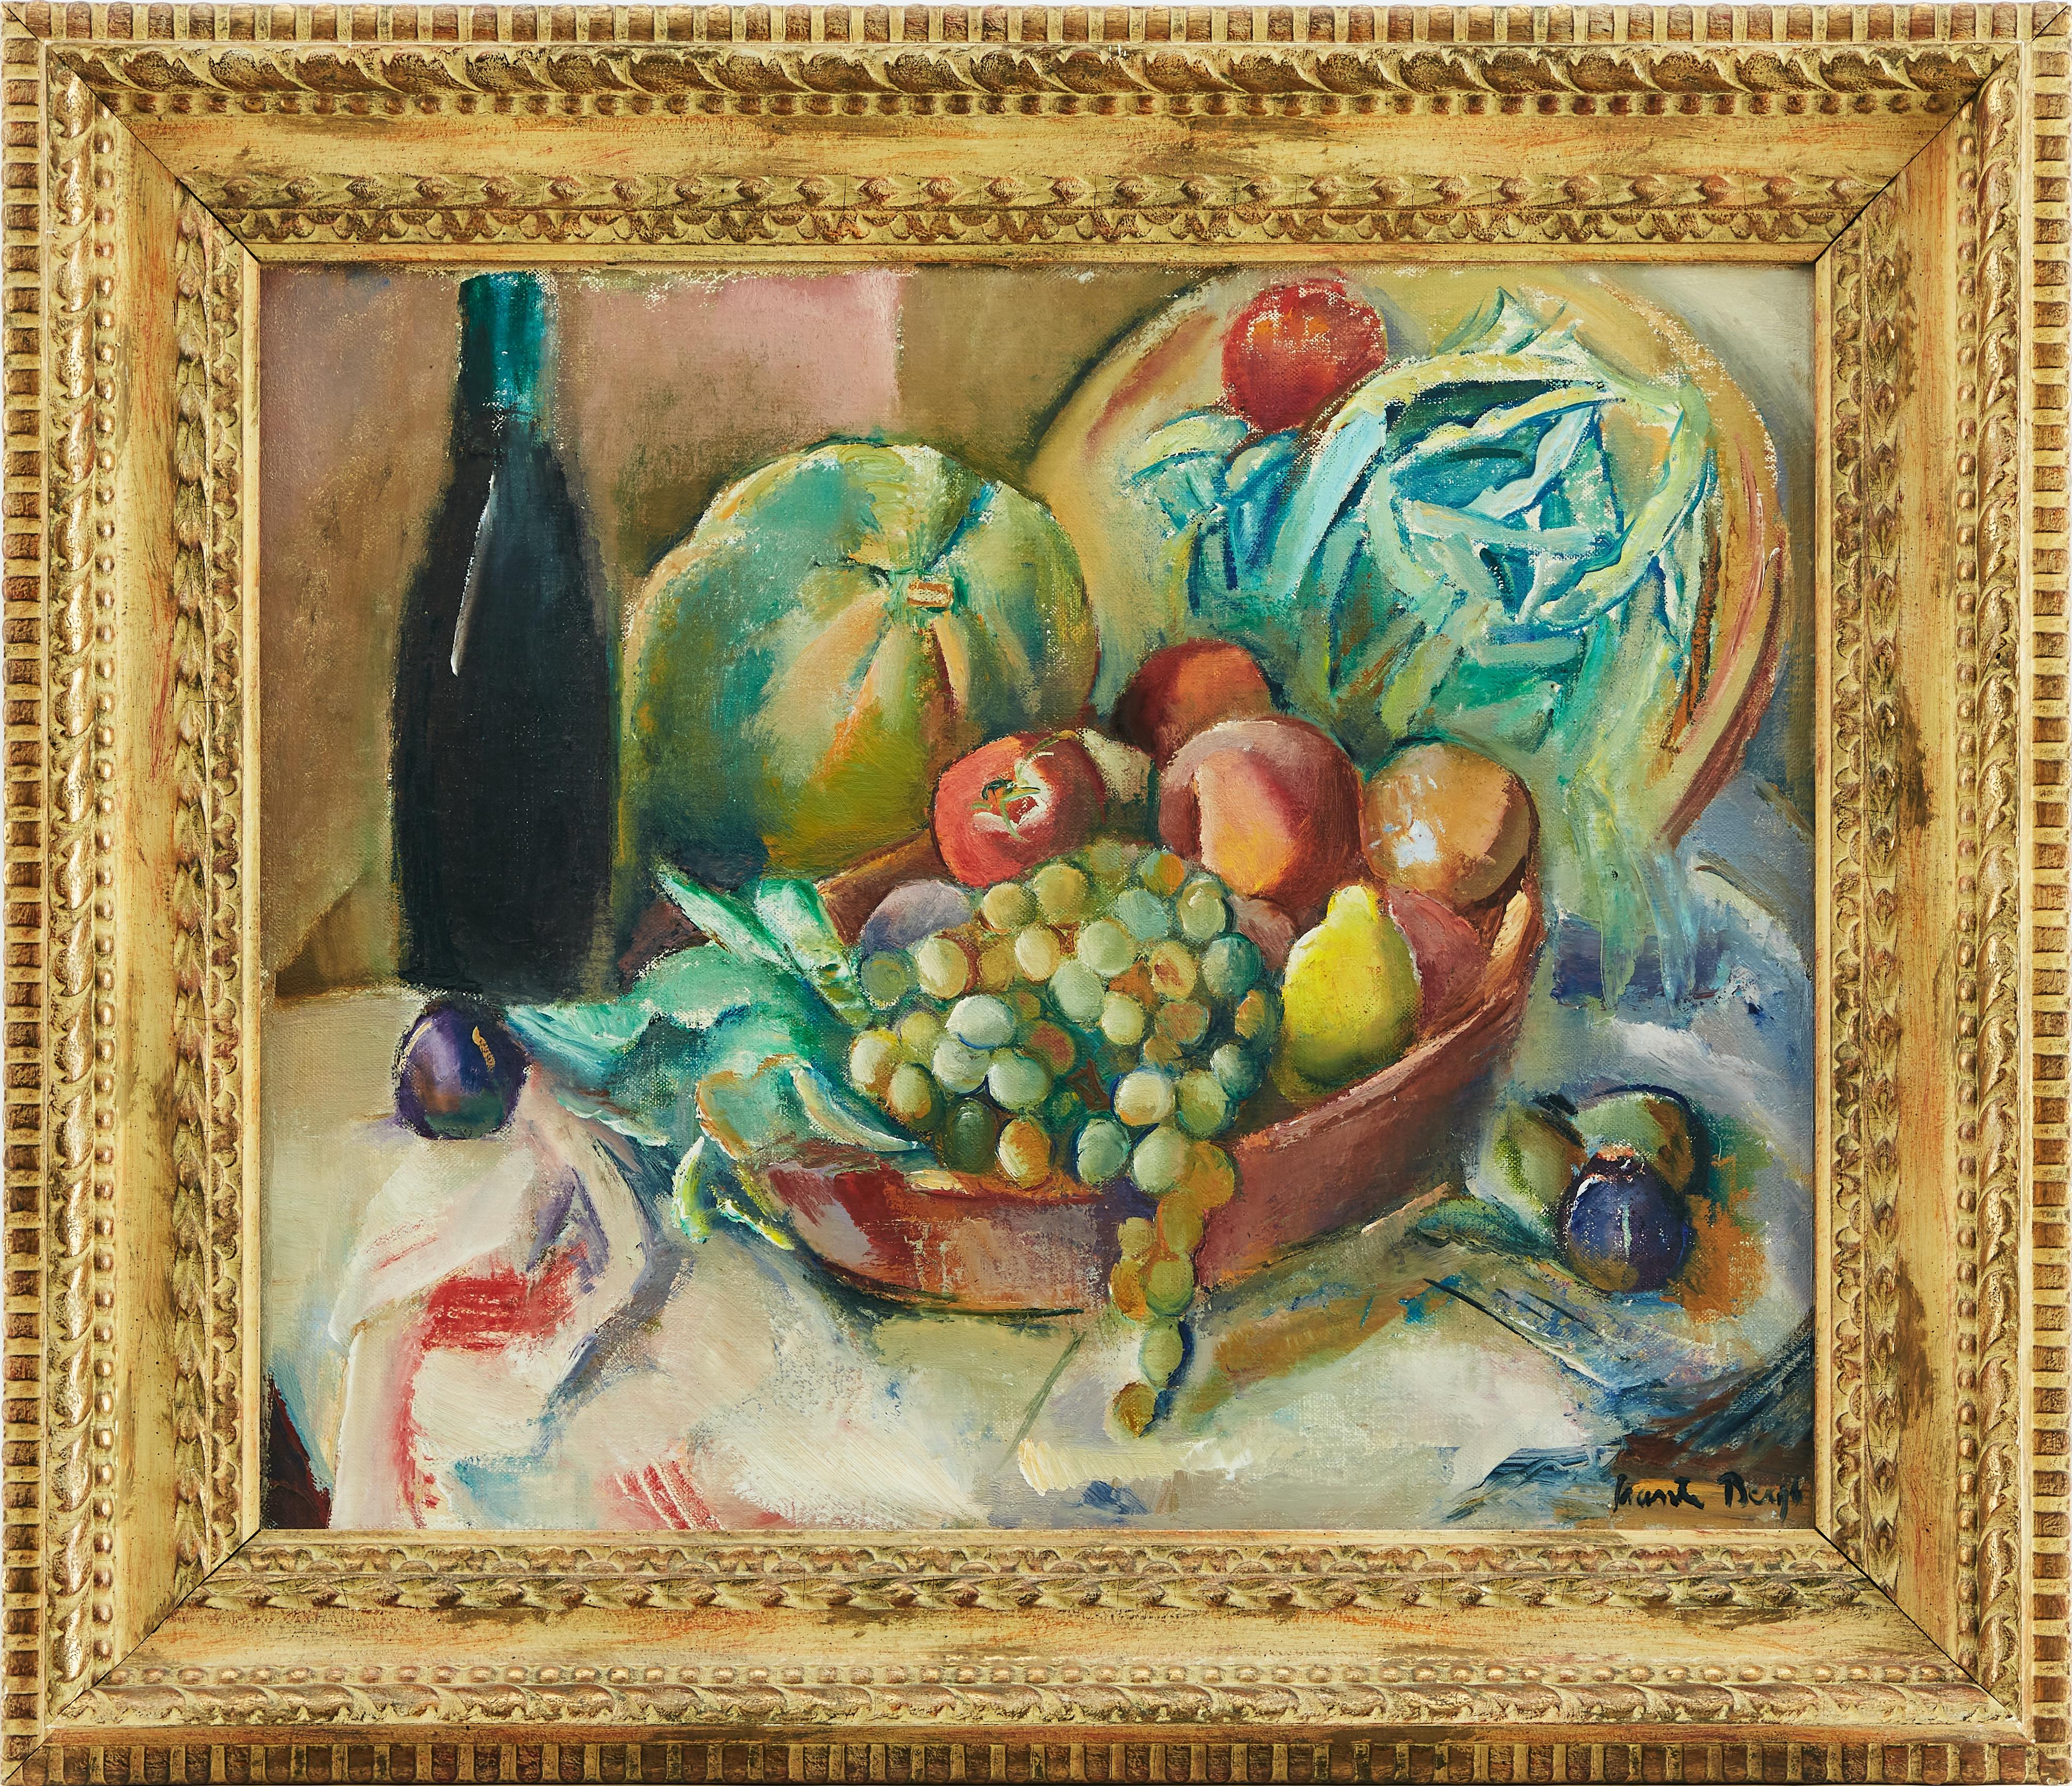 A beautiful still life of fruits in a basket set on a table by Ewald Svante Bergh, (1885-1946). Oil on canvas. Bergh was a Swedish painter and a member of the artist group 'De tolv'.
At the age of 14 in 1899, he began following the evening courses